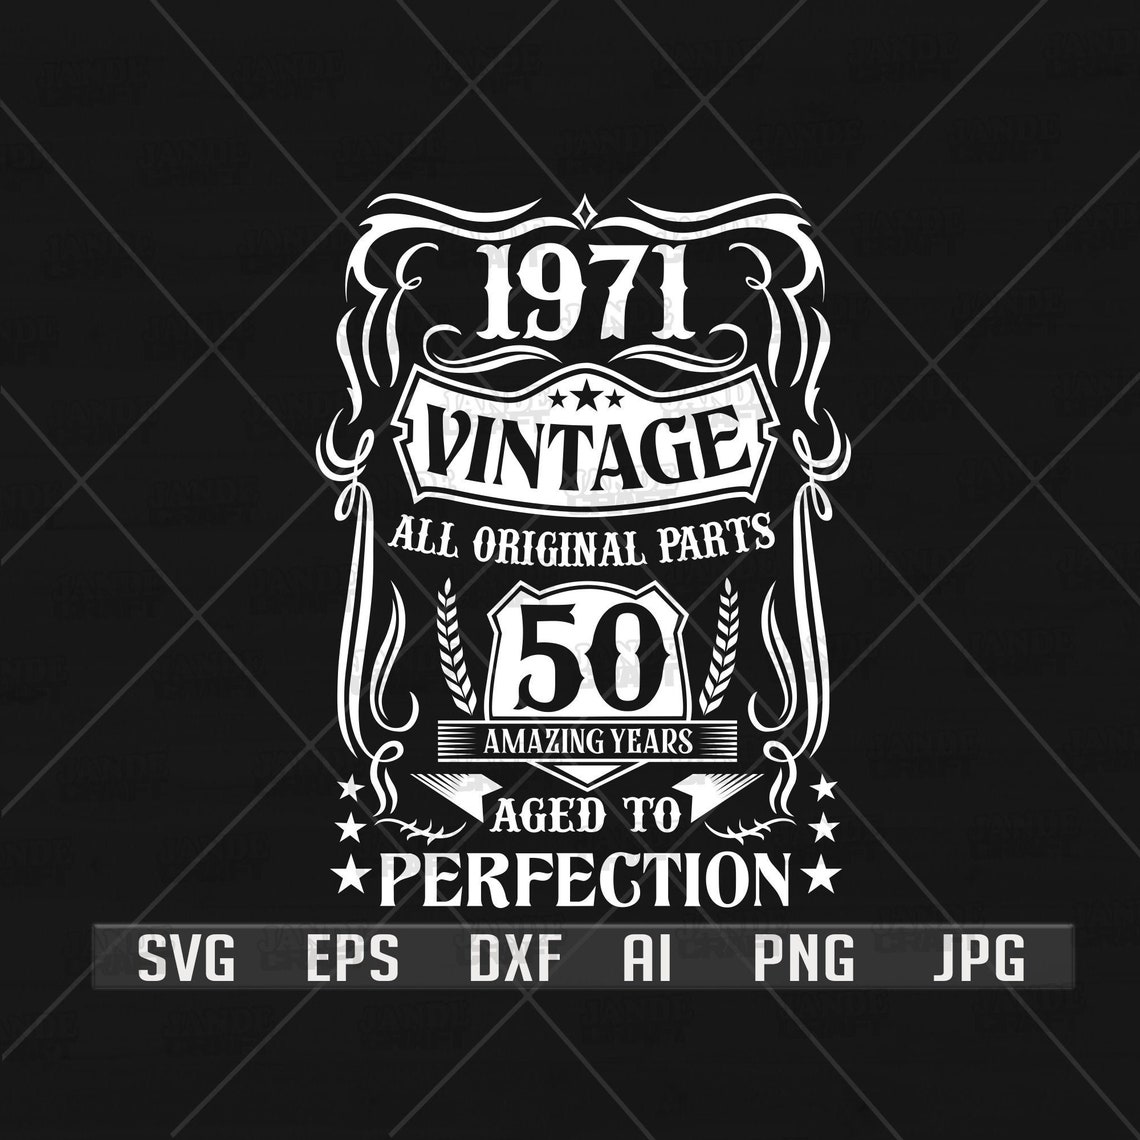 50th Birthday Svg Aged to Perfection Svg Vintage Svg | Etsy